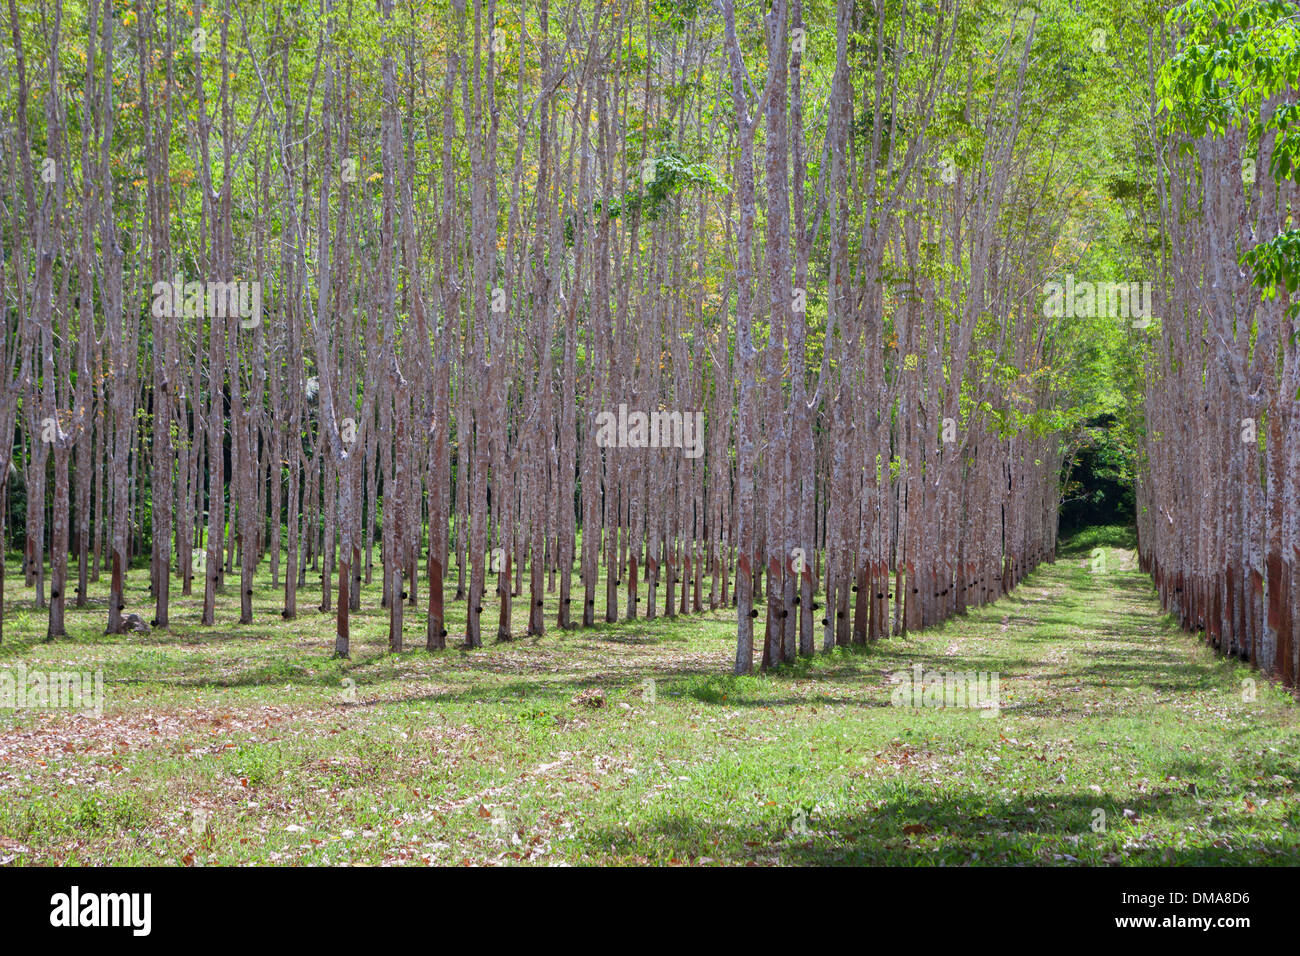 Rubber tree plantation with collecting bowls in Thailand Stock Photo